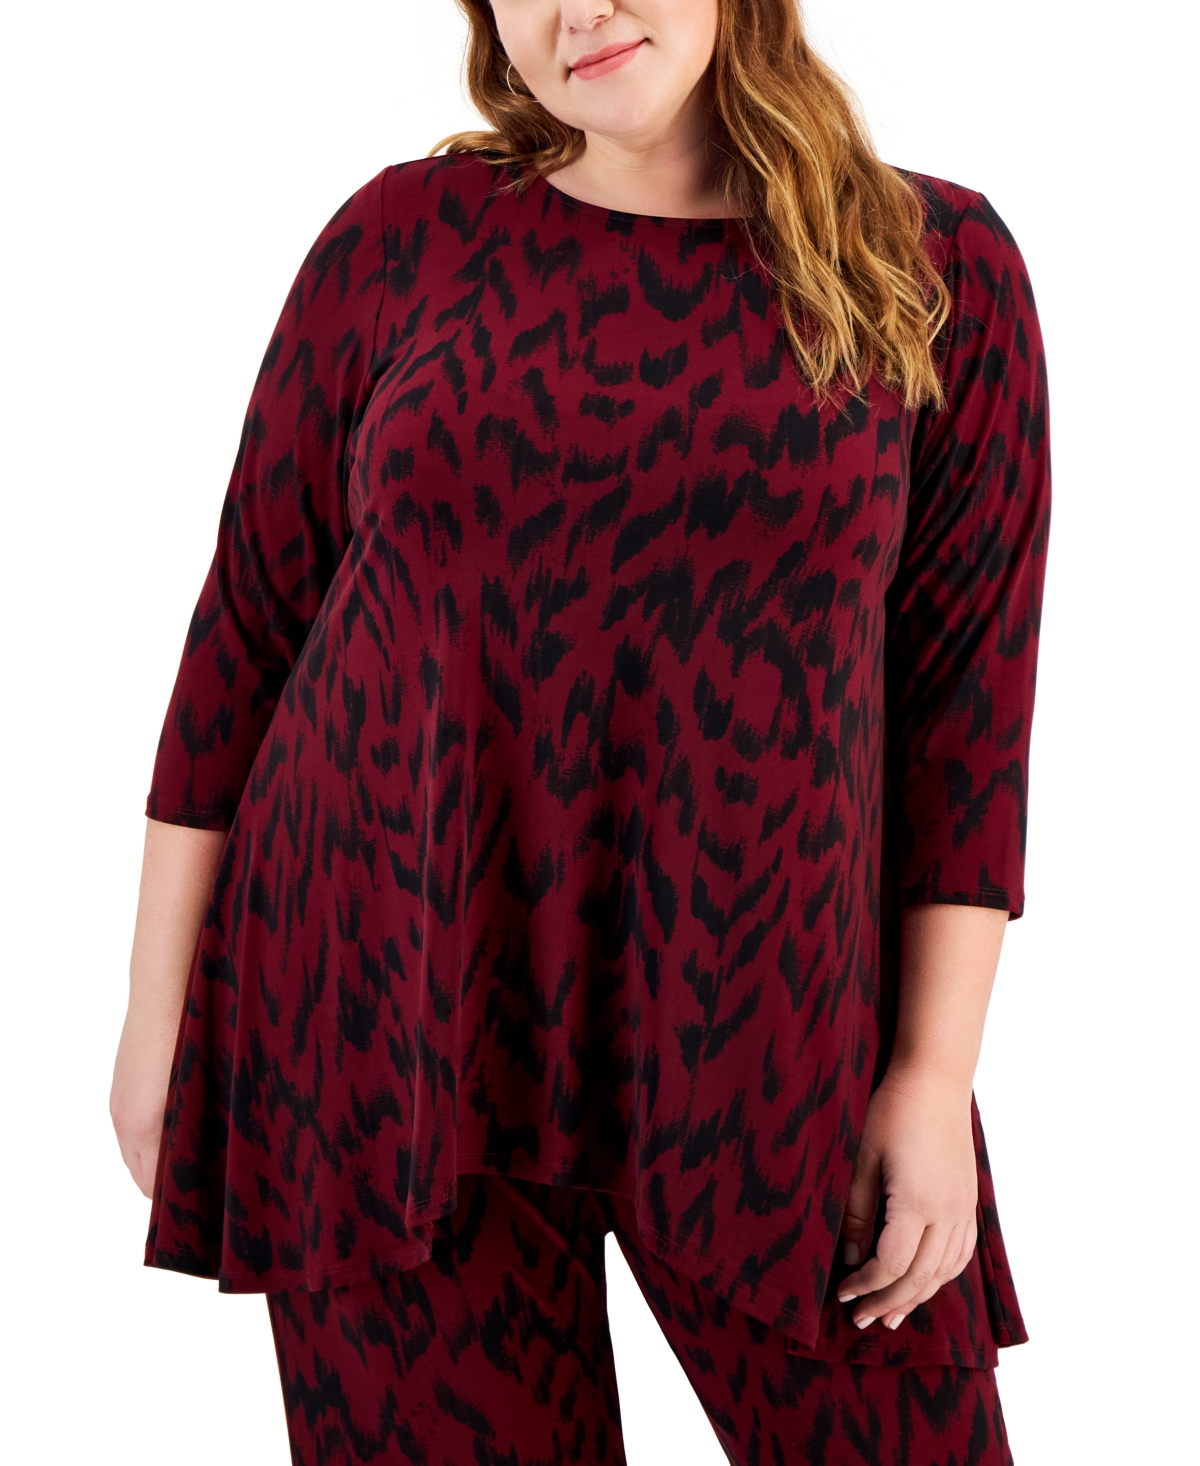 JM Collection Women's Open-Front Cardigan, Printed Top & Tummy